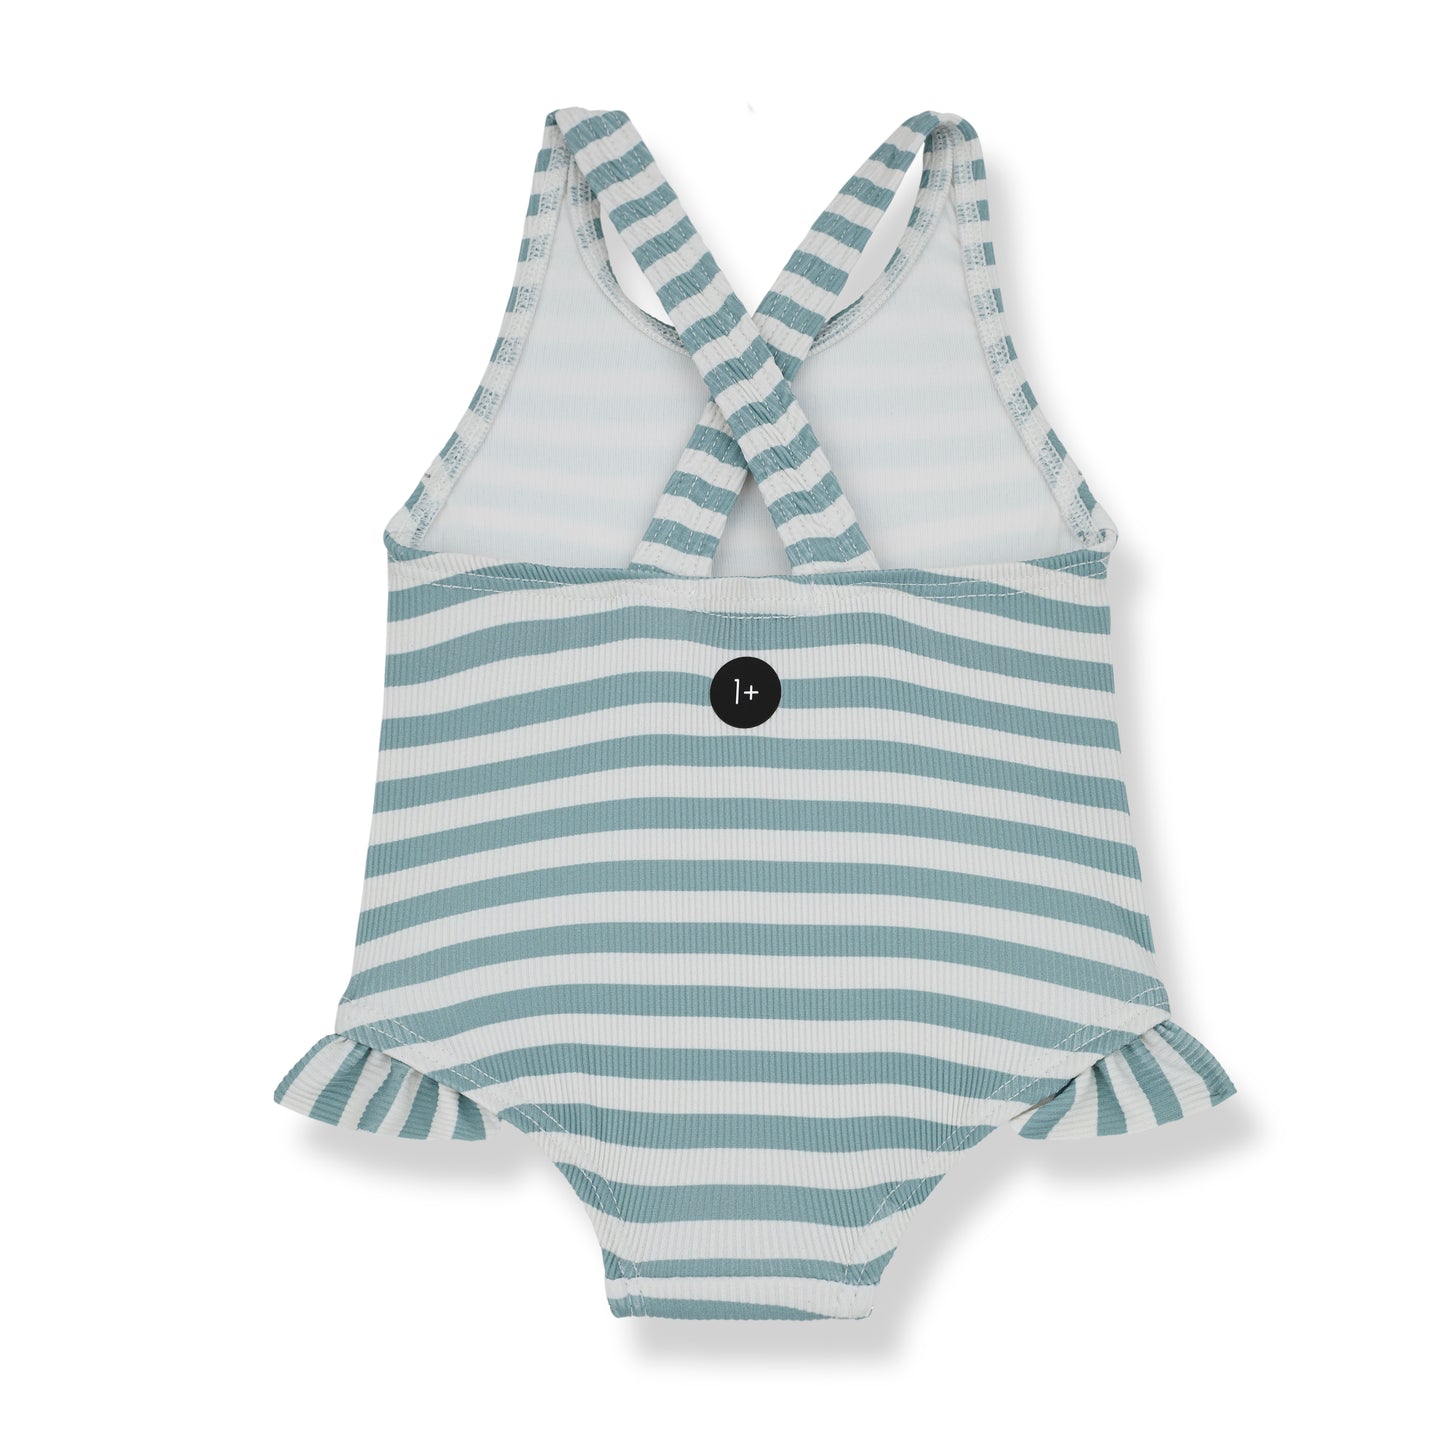 1 + IN THE FAMILY BLUE STRIPED SWIMSUIT